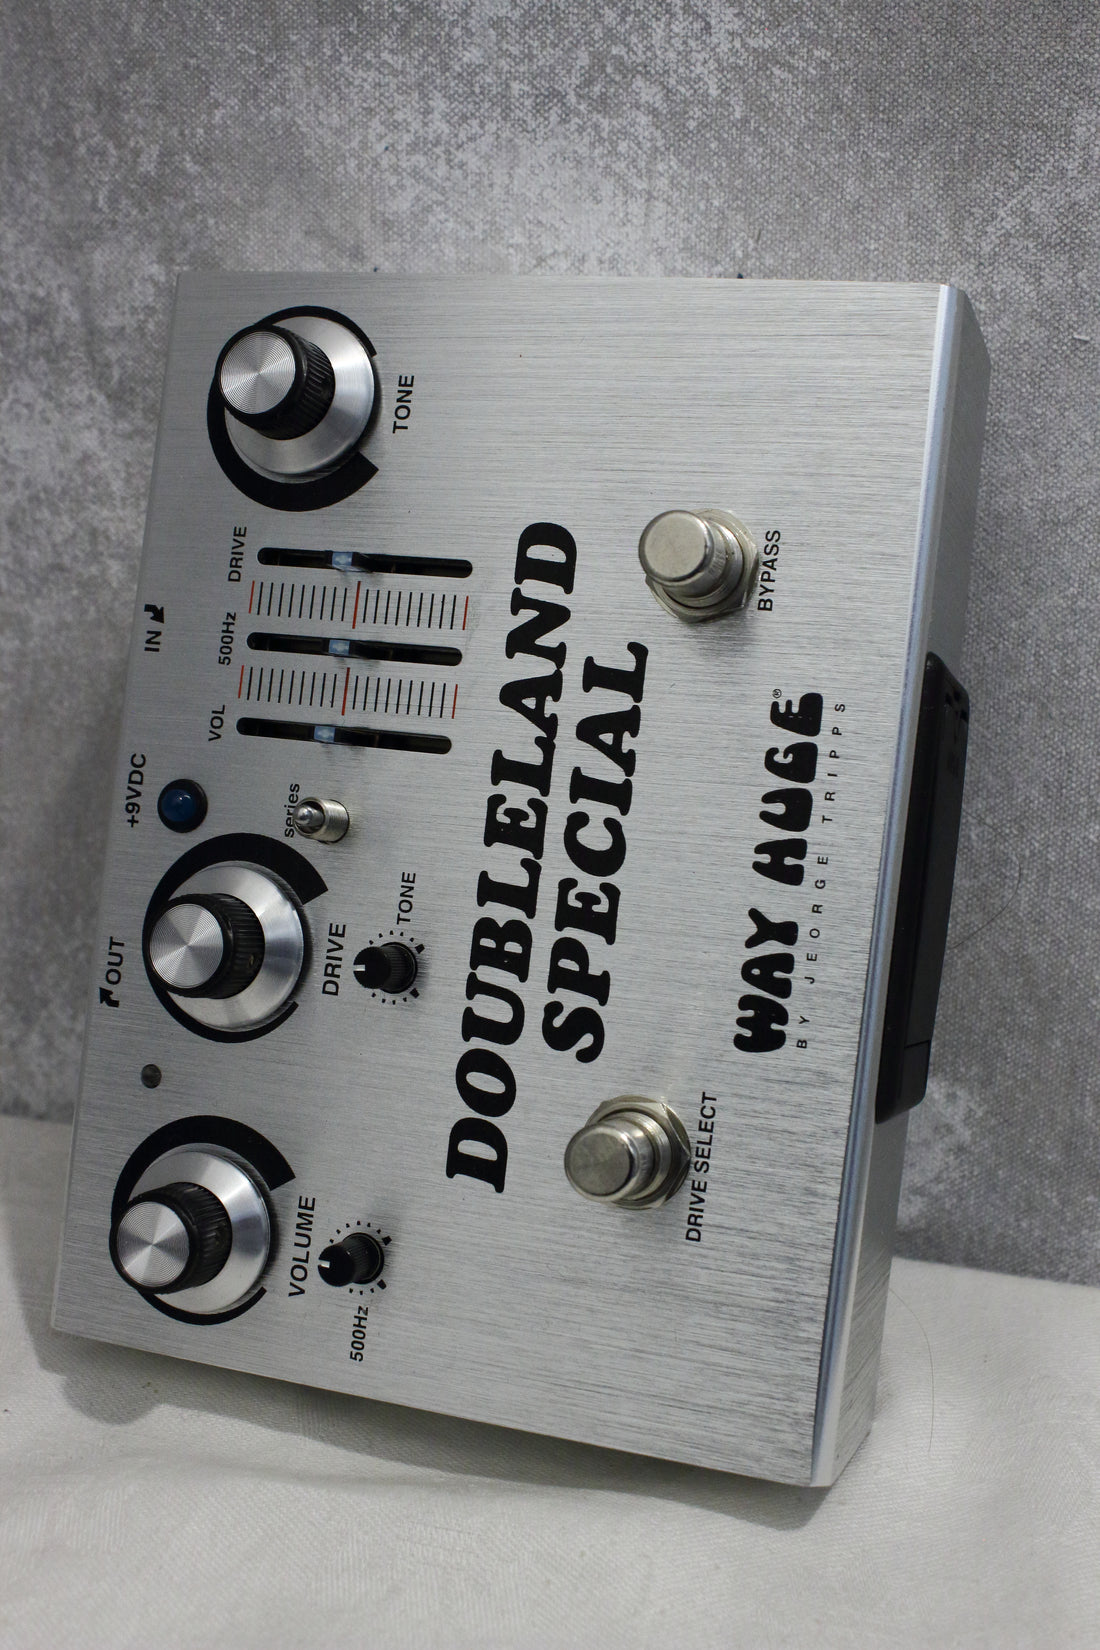 Way Huge WHE212 Doubleland Special Overdrive Pedal